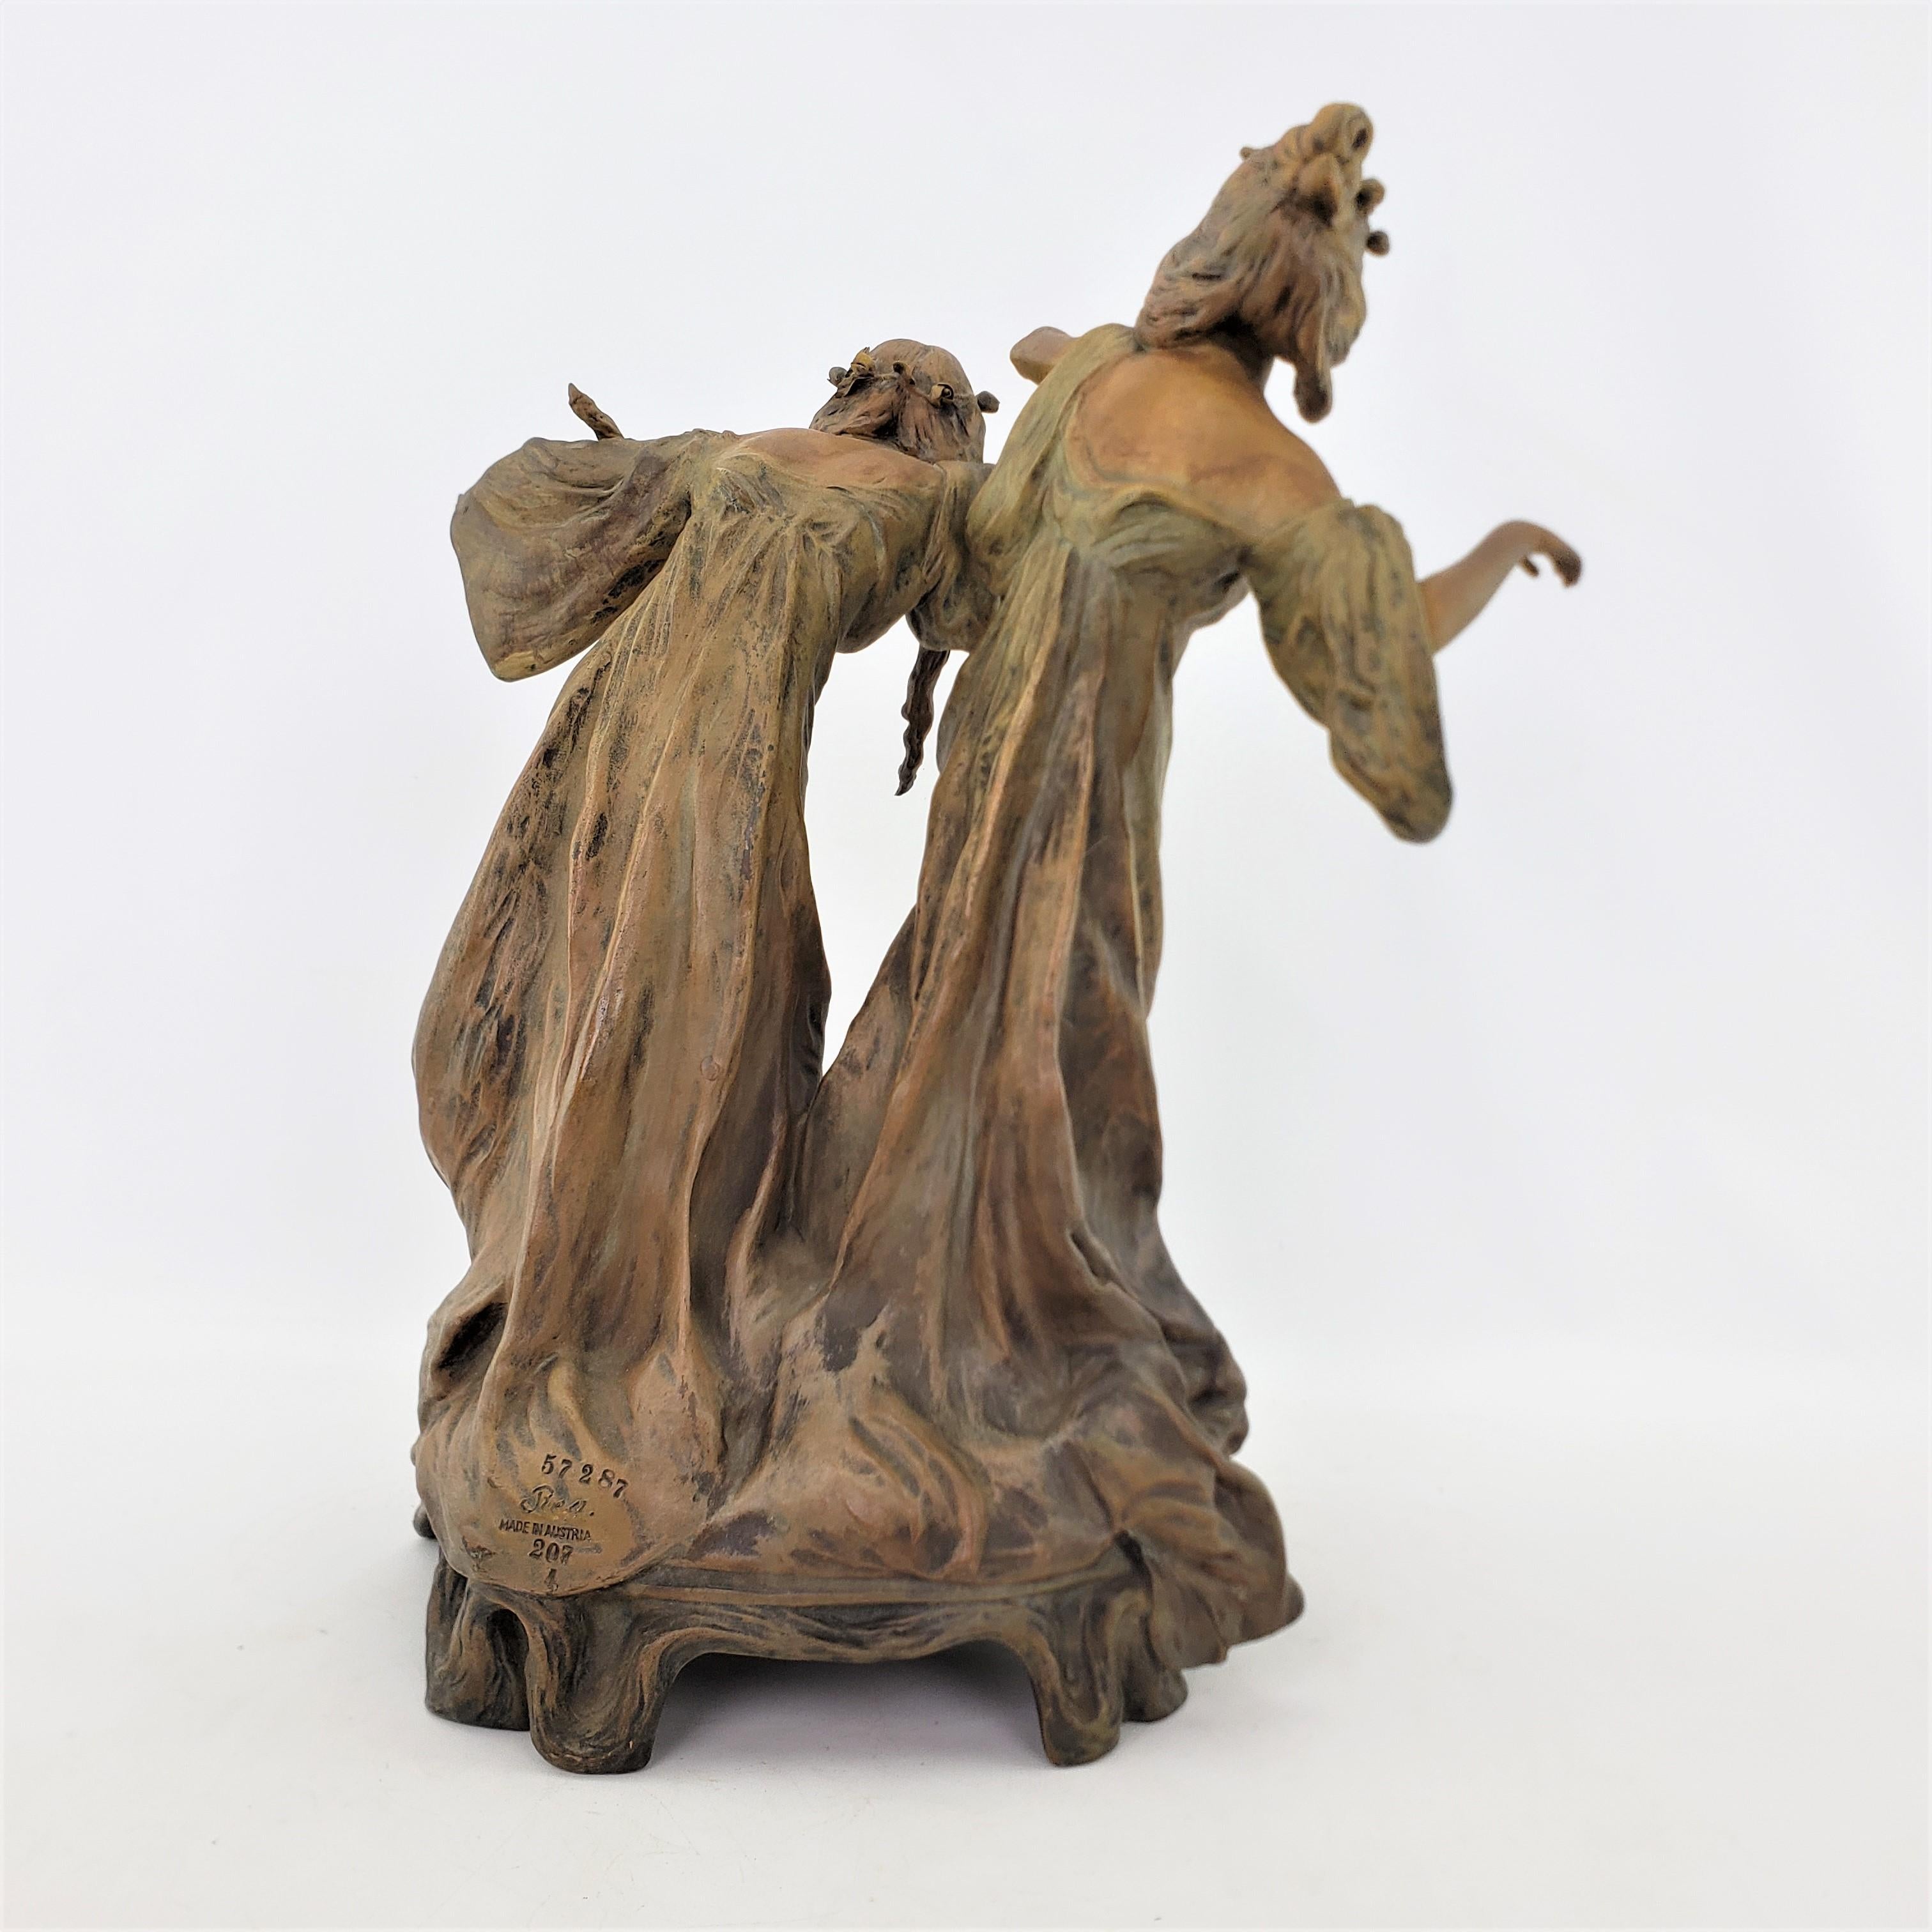 Hand-Crafted Antique Austrian Art Nouveau Patinated Terracotta Sculpture of Two Dancing Women For Sale